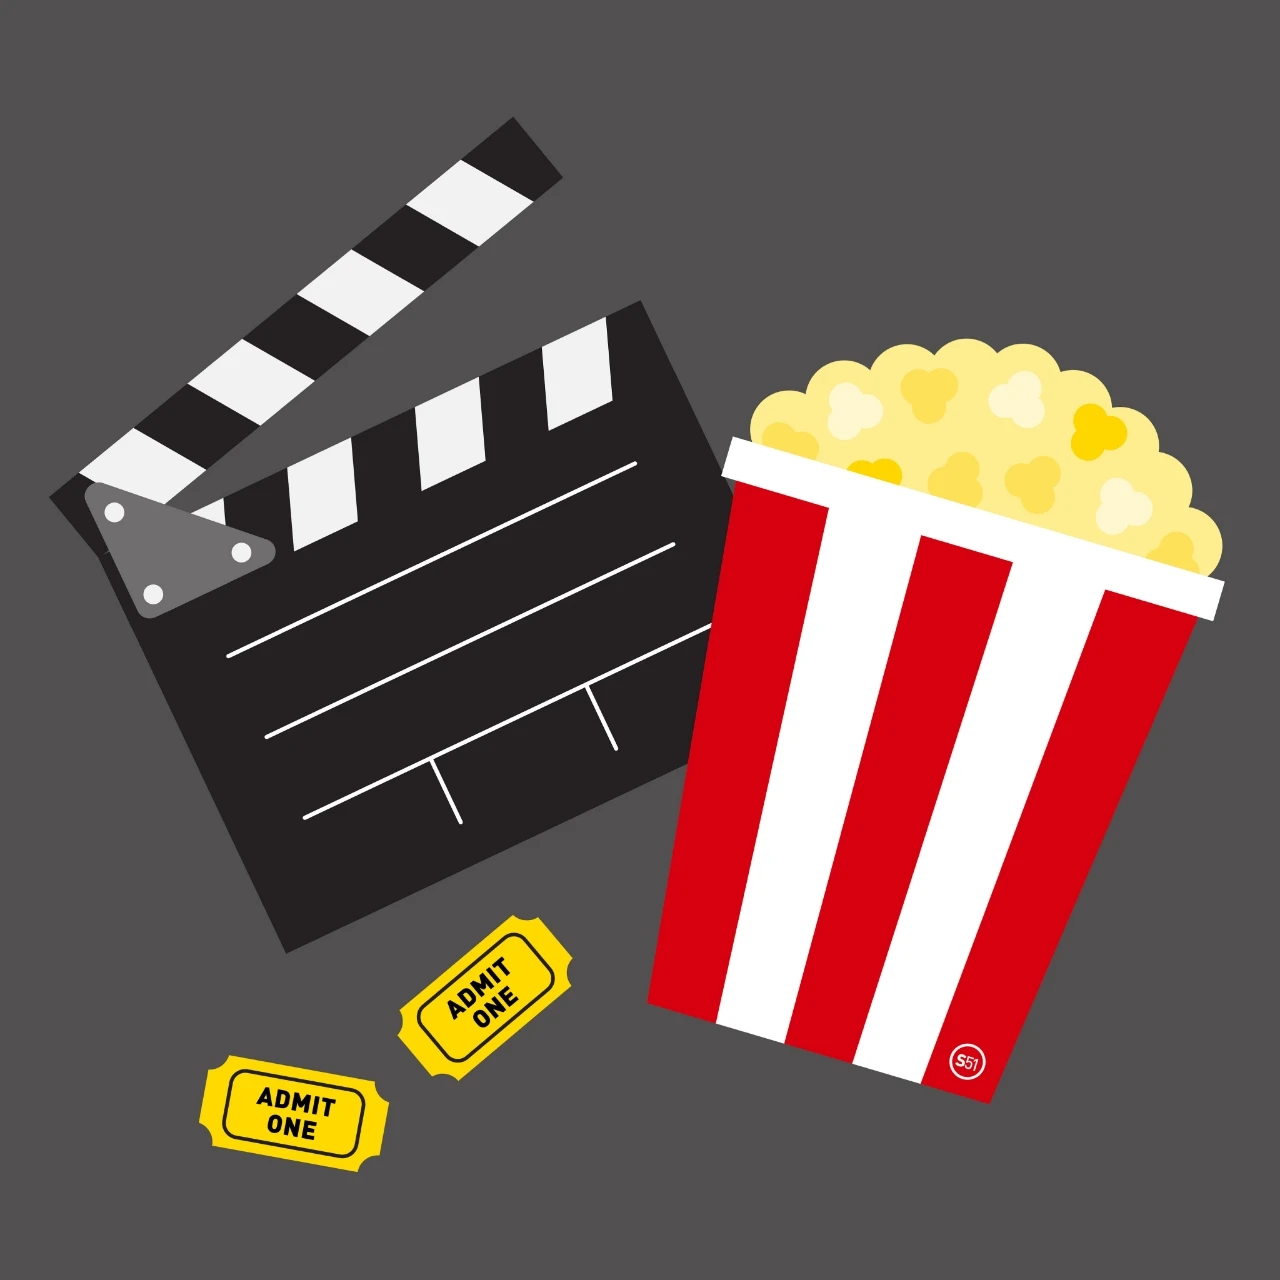 A movie clapper and popcorn on a grey background.